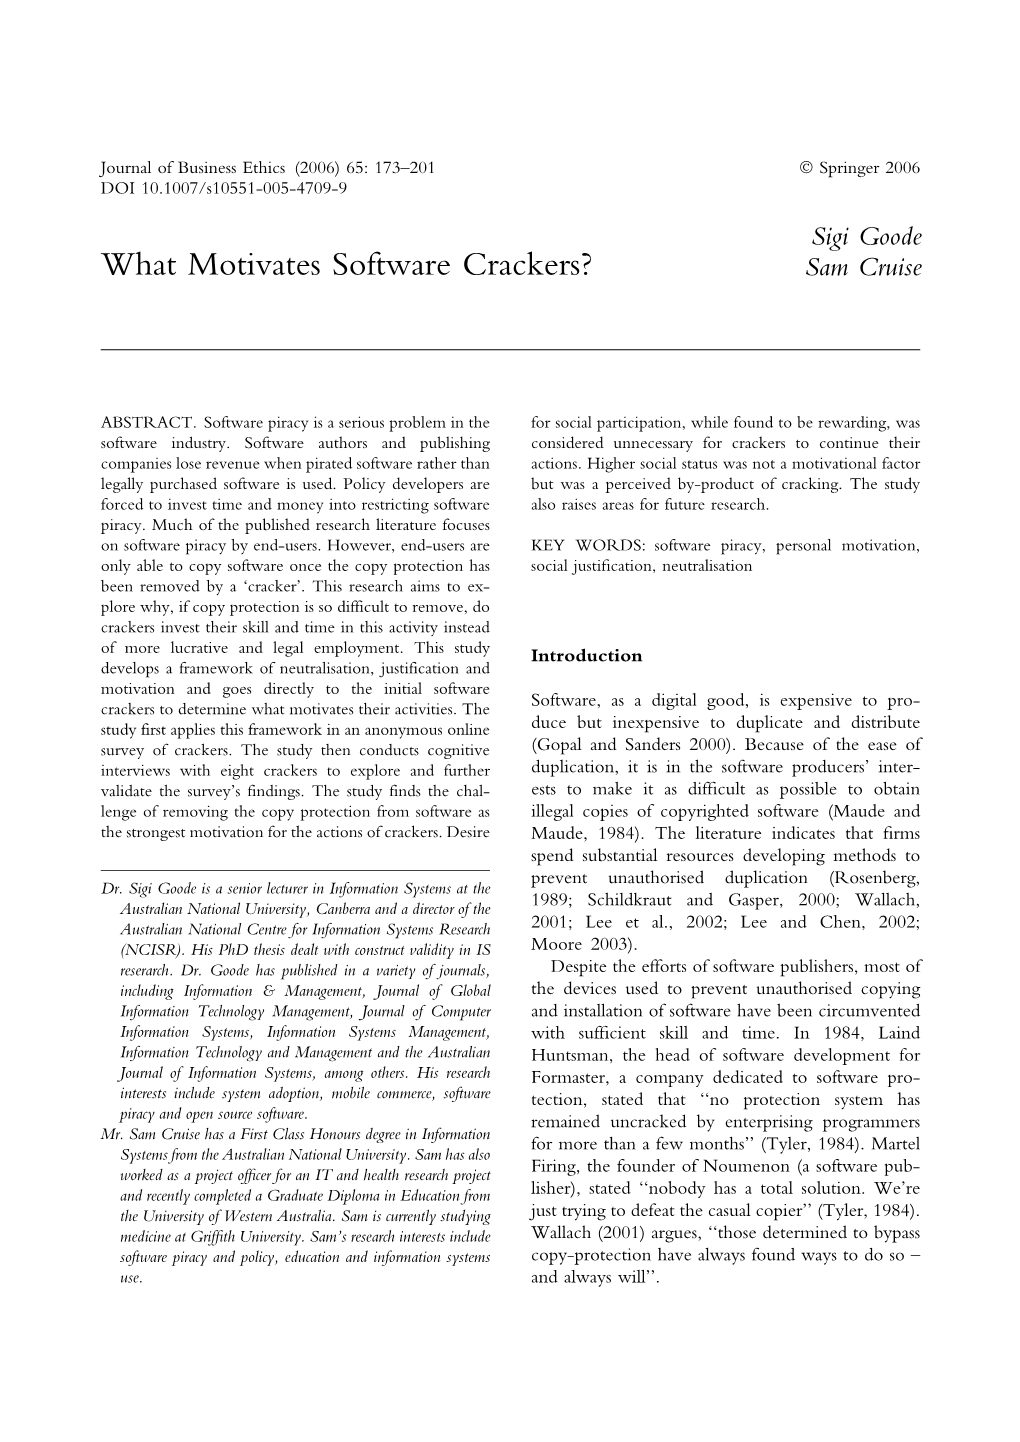 What Motivates Software Crackers? Sam Cruise